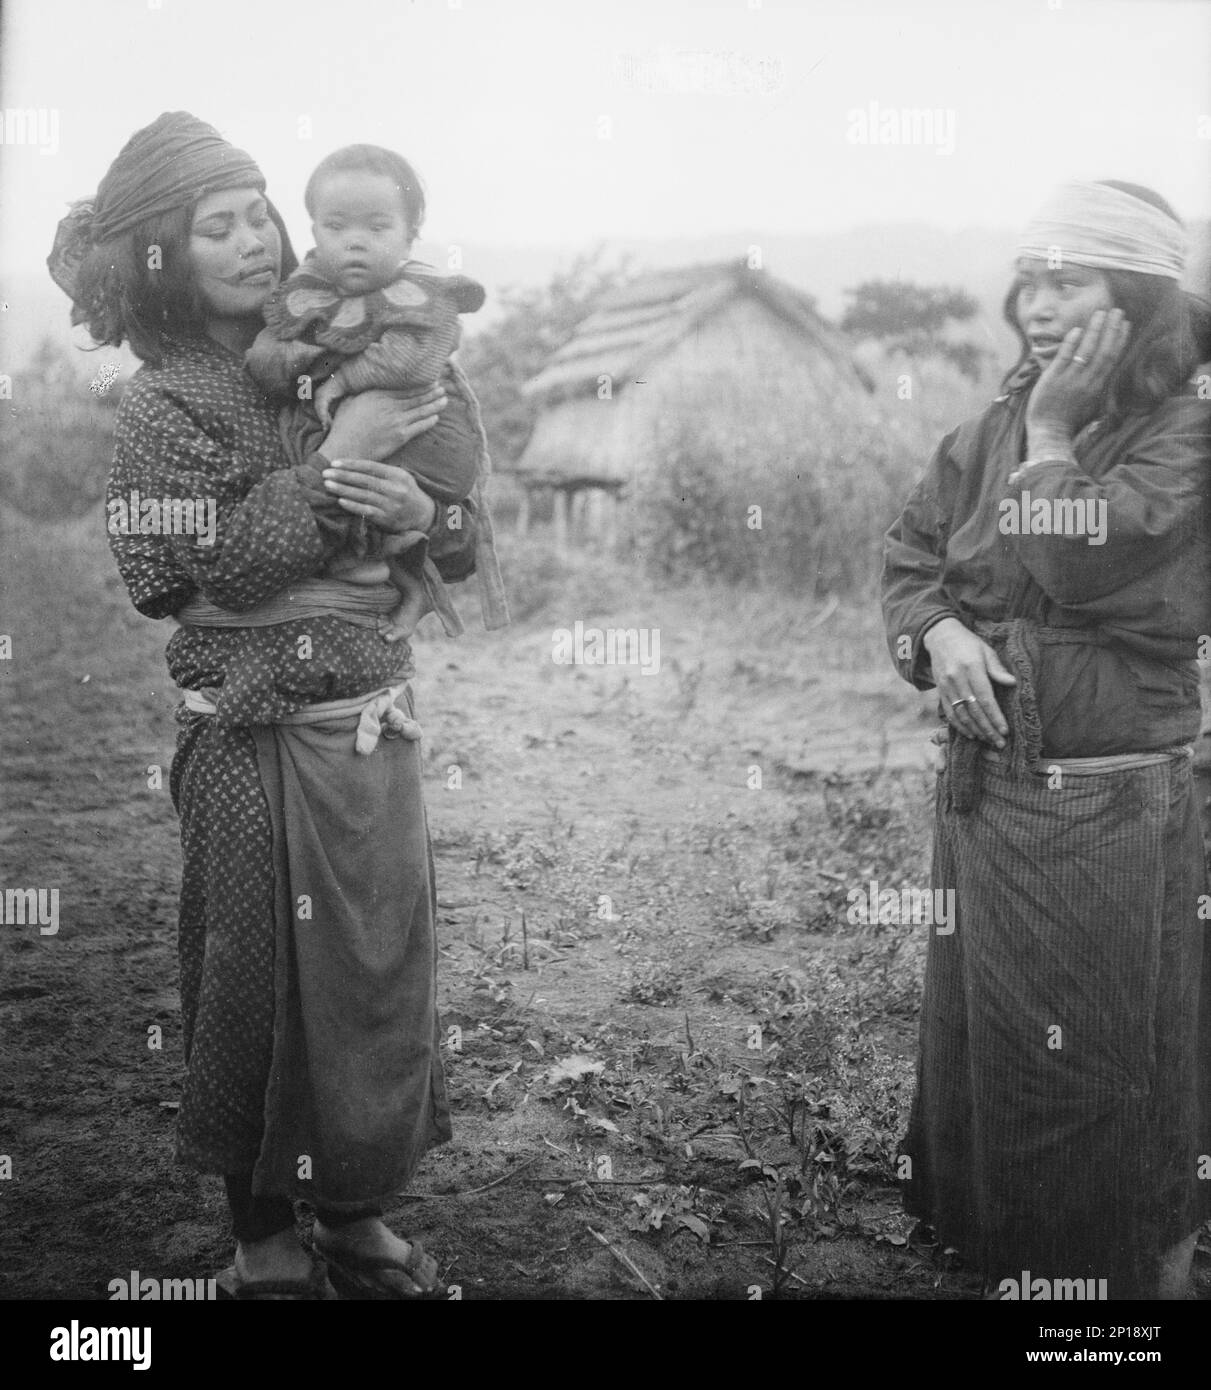 Two Ainu woman, one holding a child, standing outside, 1908. Stock Photo